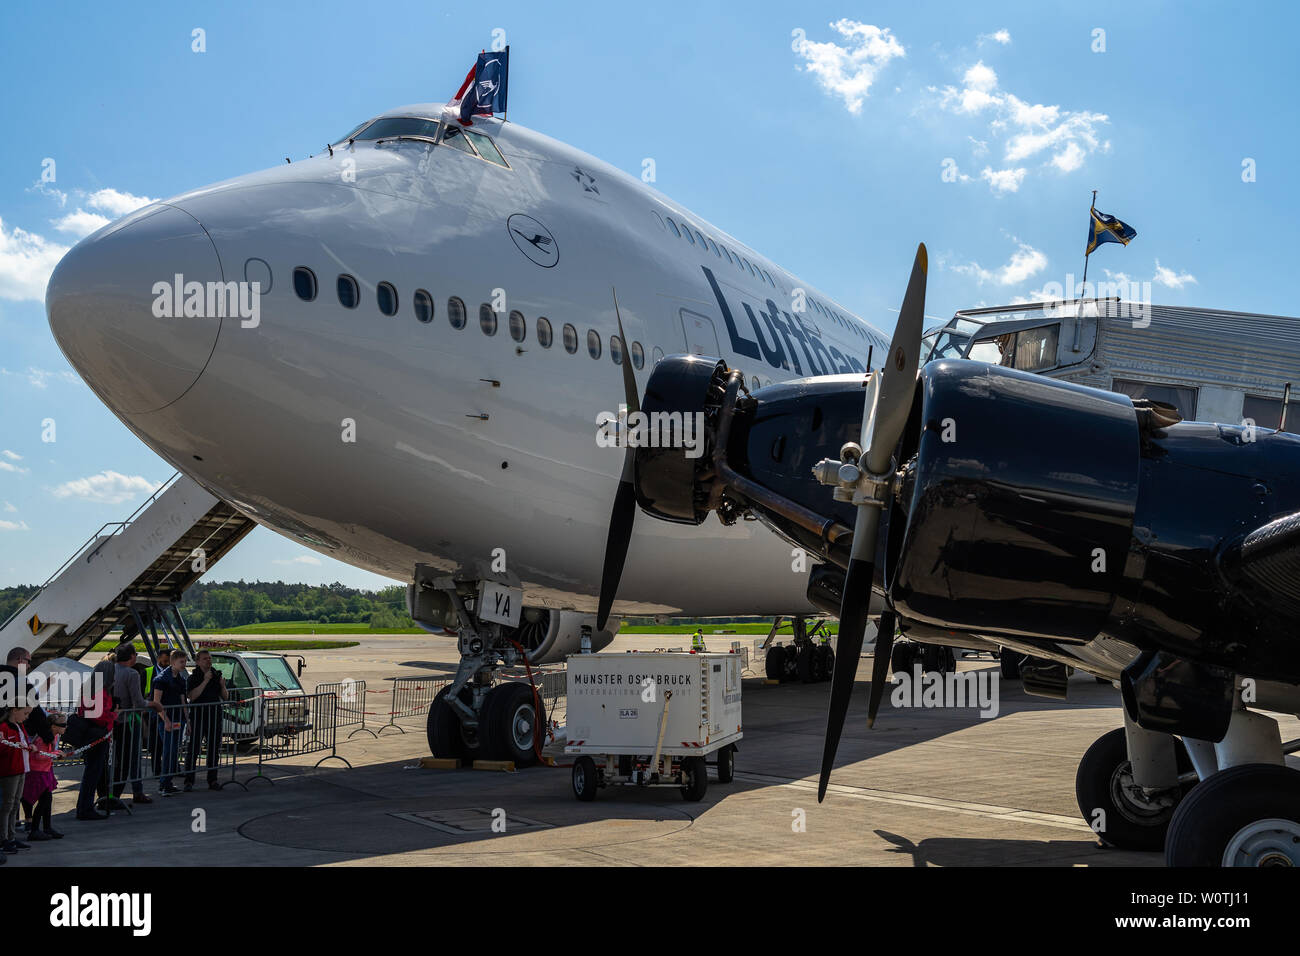 BERLIN - APRIL 28, 2018: Transport aircraft Junkers Ju 52/3m (foreground) and the widebody jet airliner Boeing 747-8 (background). Lufthansa. Exhibition ILA Berlin Air Show 2018. Stock Photo